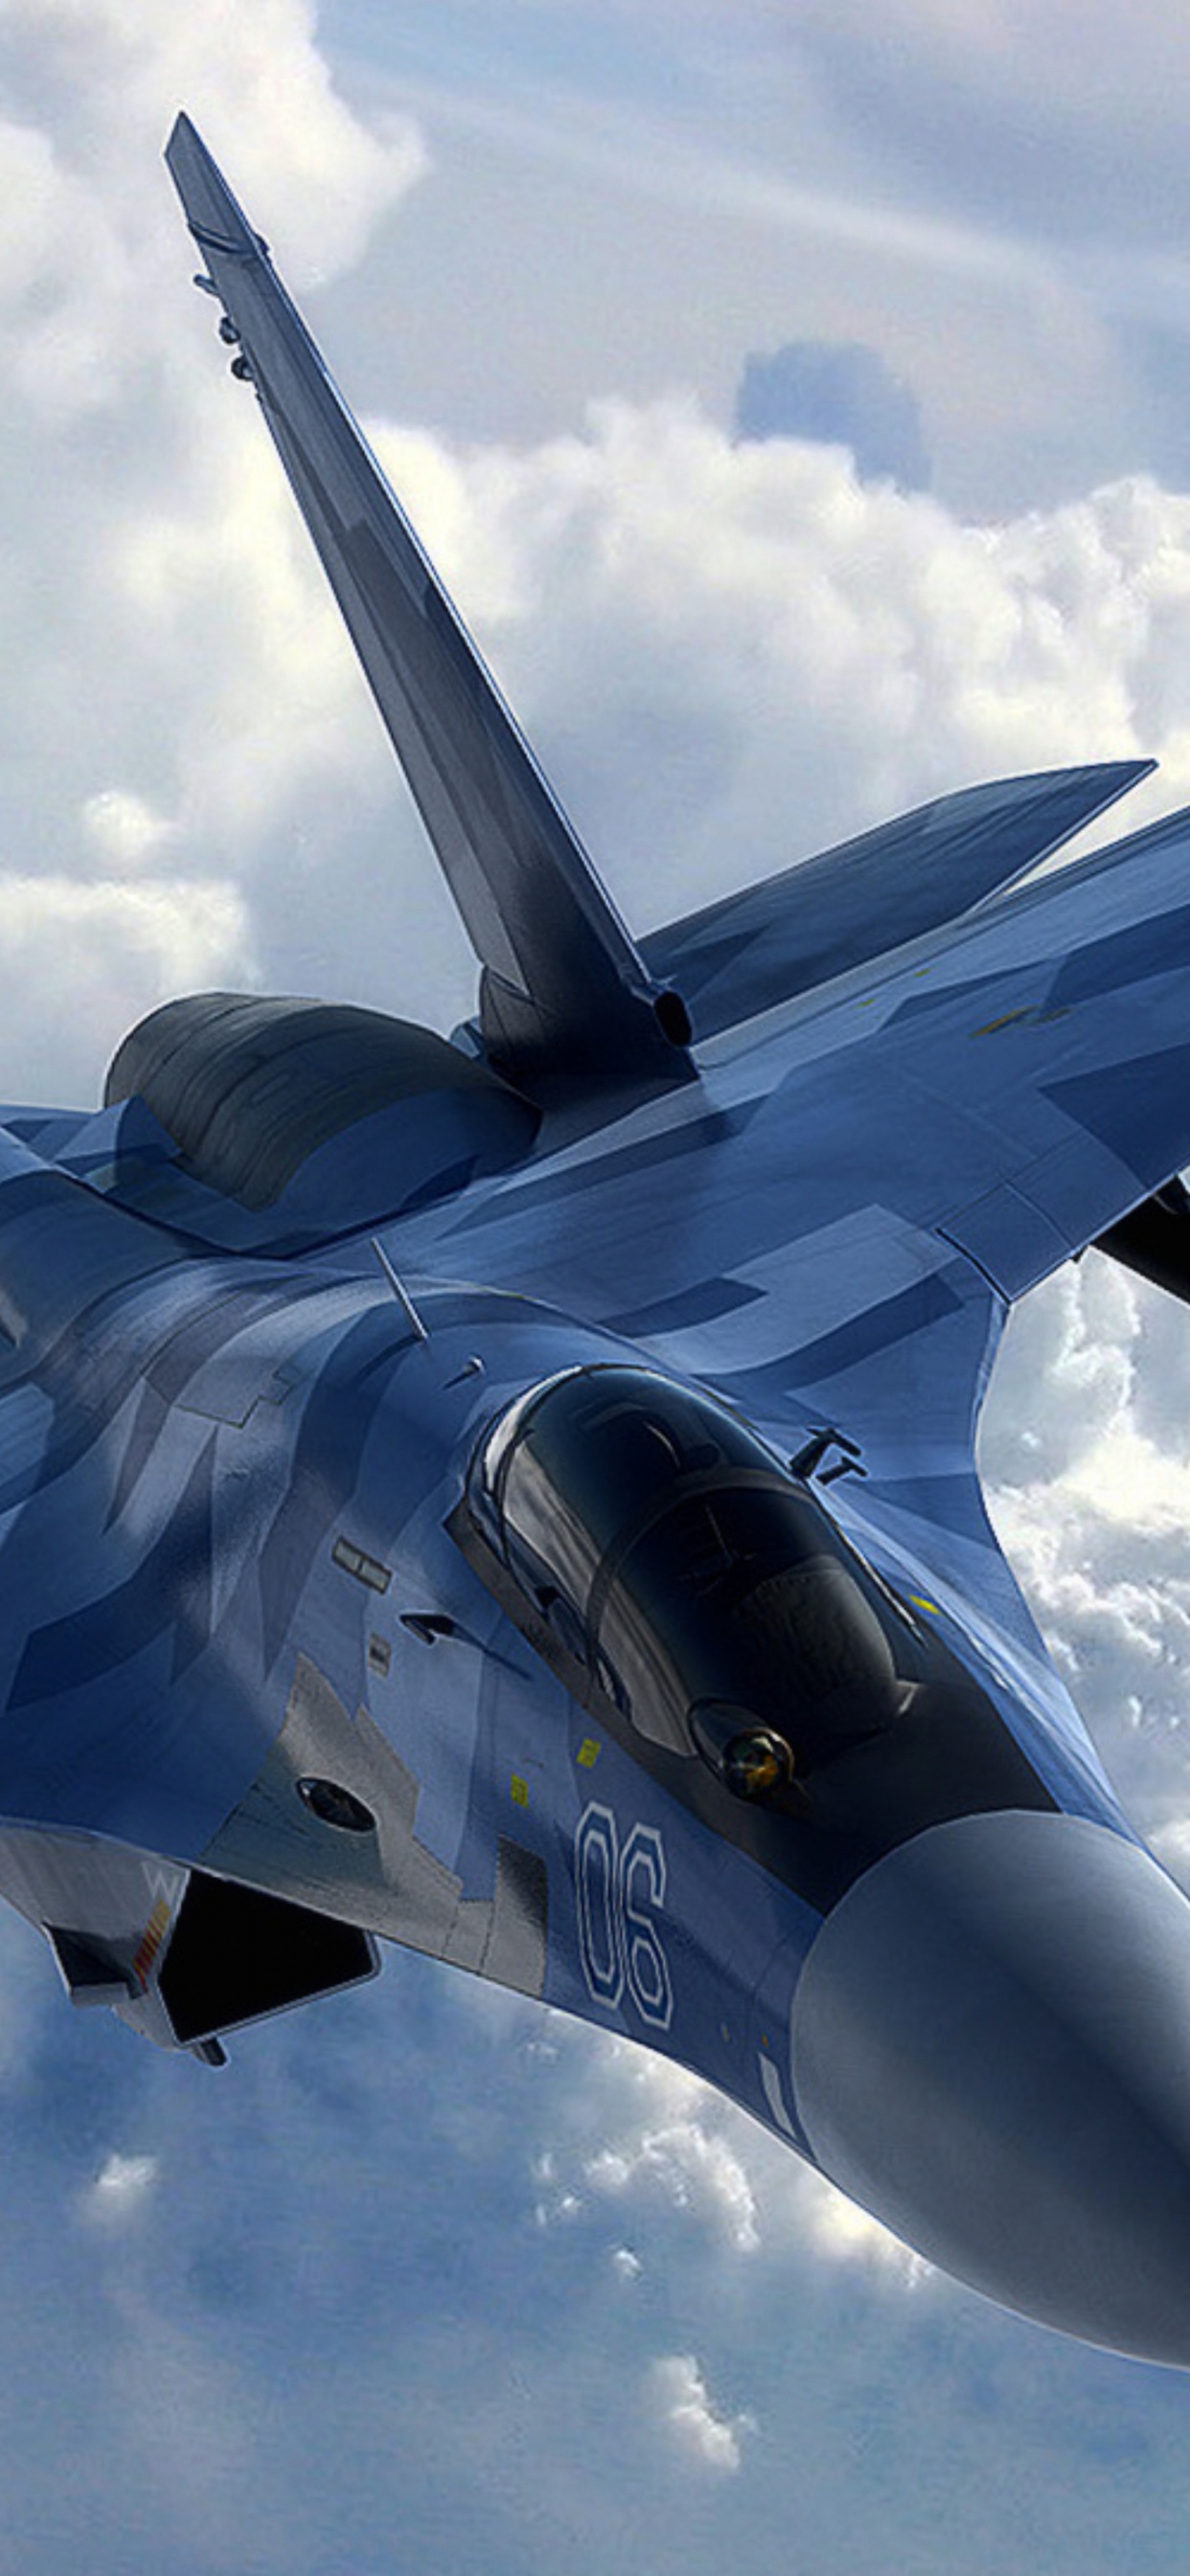 Gray Fighter Jet Flying in The Sky. Wallpaper in 1242x2688 Resolution